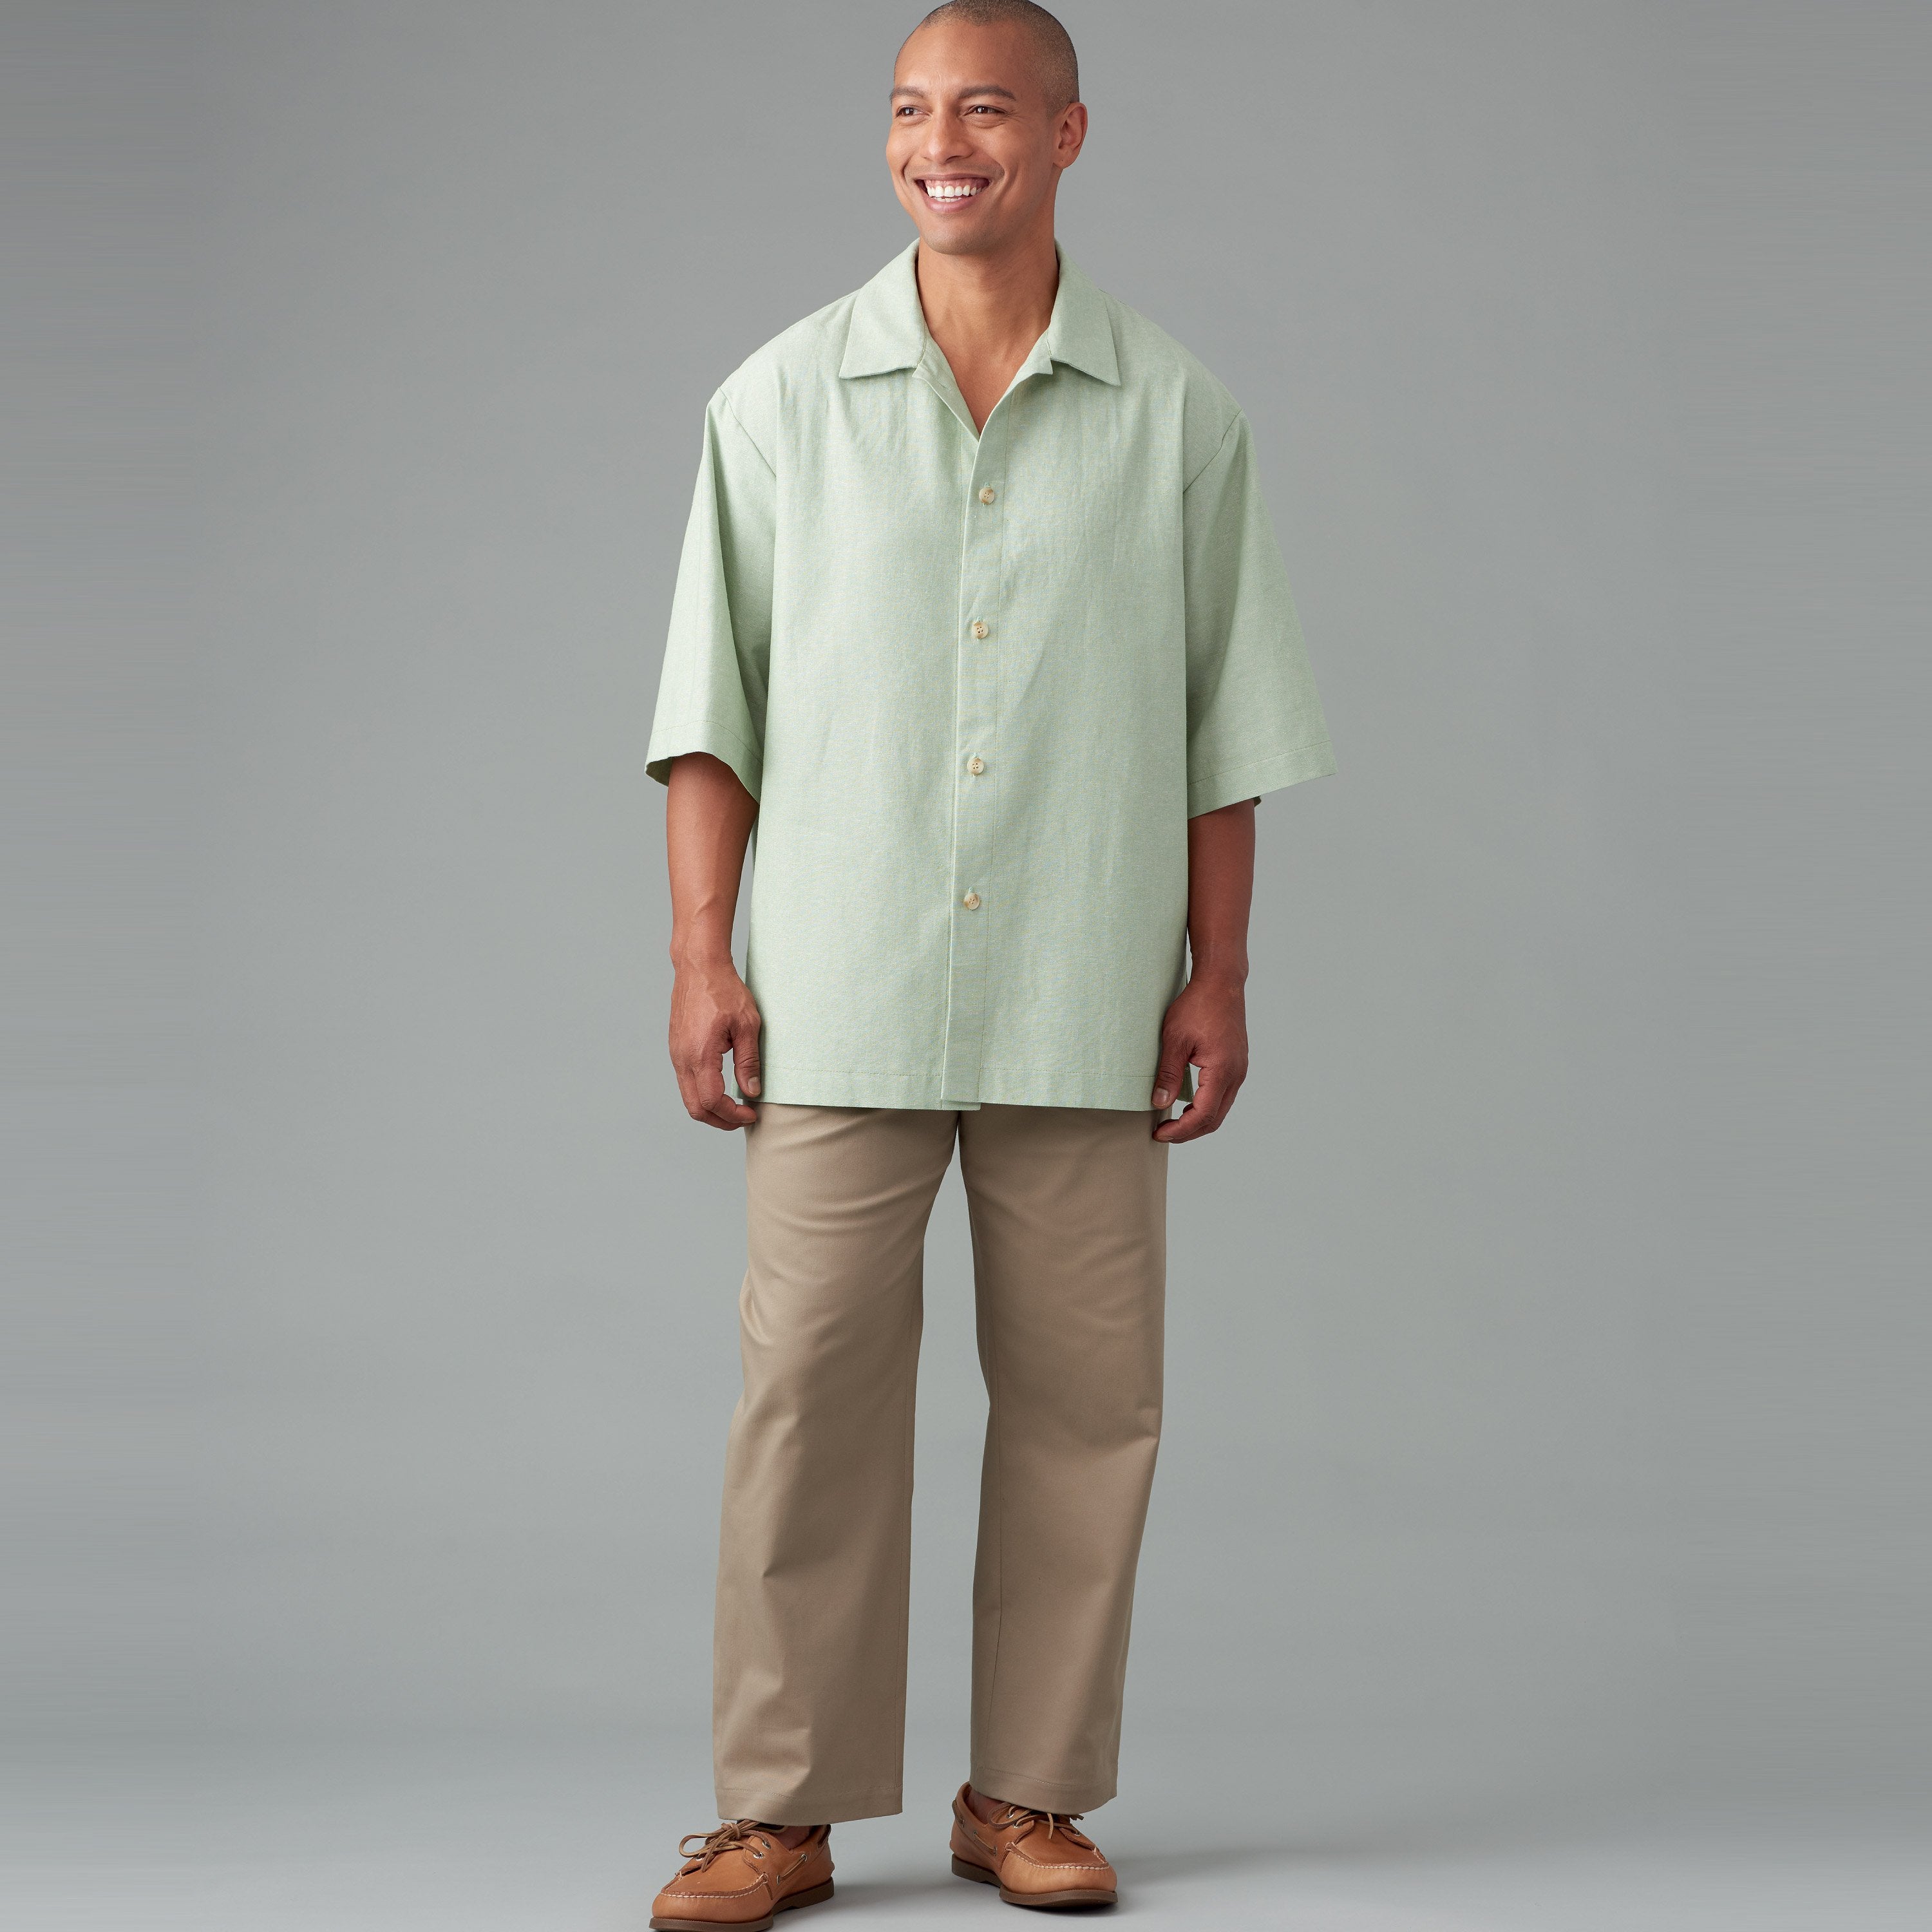 Simplicity Sewing Pattern 9279 Men's Shirt, Pants and Shorts from Jaycotts Sewing Supplies